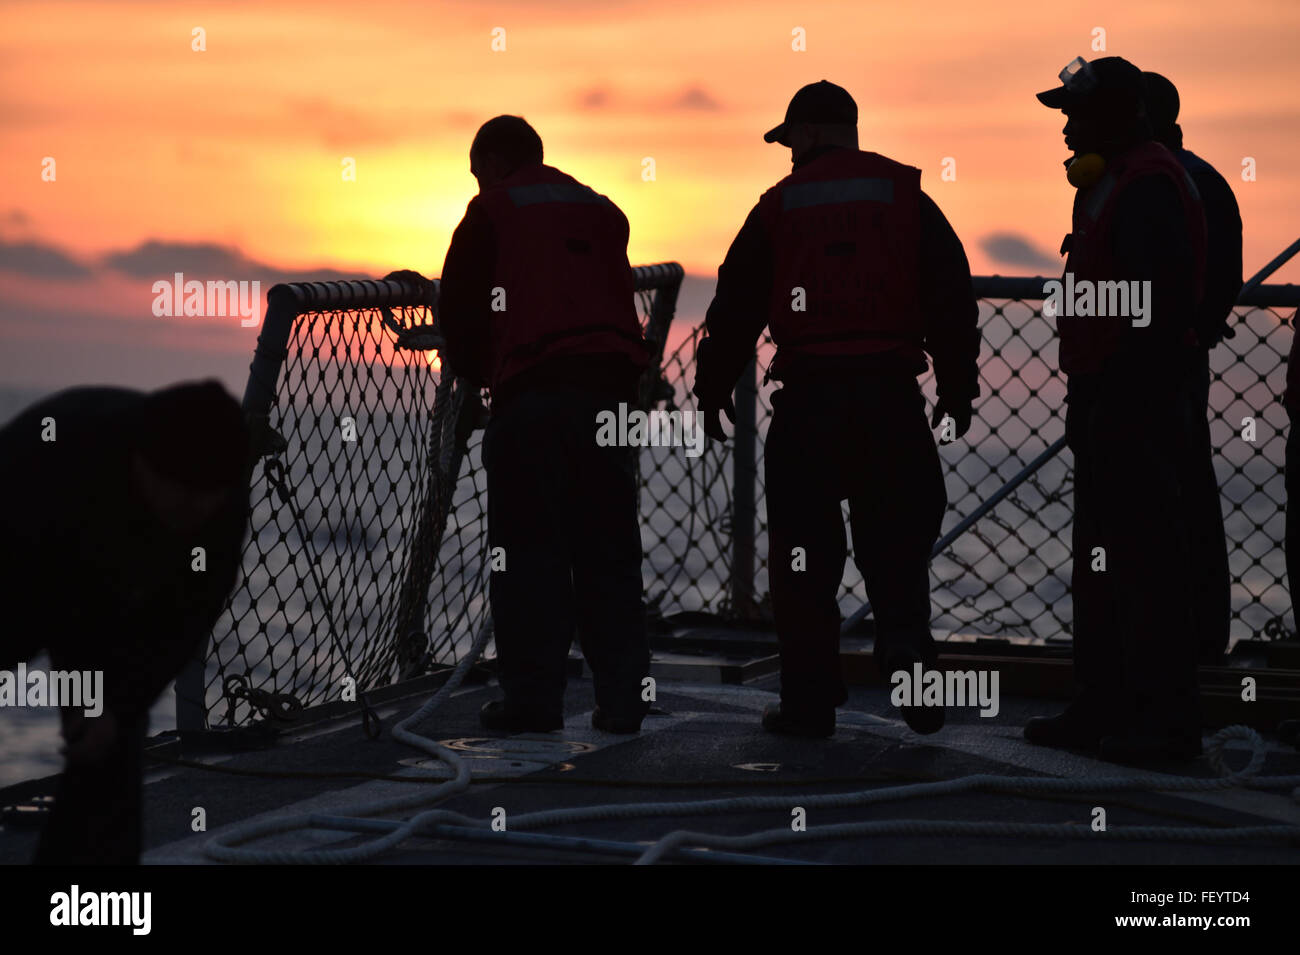 BLACK SEA (Dec. 8, 2015) Sailors setup a practical weapons course aboard USS Ross (DDG 71) while operating in the Black Sea Dec. 8, 2015. Ross, an Arleigh Burke-class guided-missile destroyer, forward deployed to Rota, Spain, is conducting a routine patrol in the U.S. 6th Fleet area of operations in support of U.S. national security interests in Europe. Stock Photo